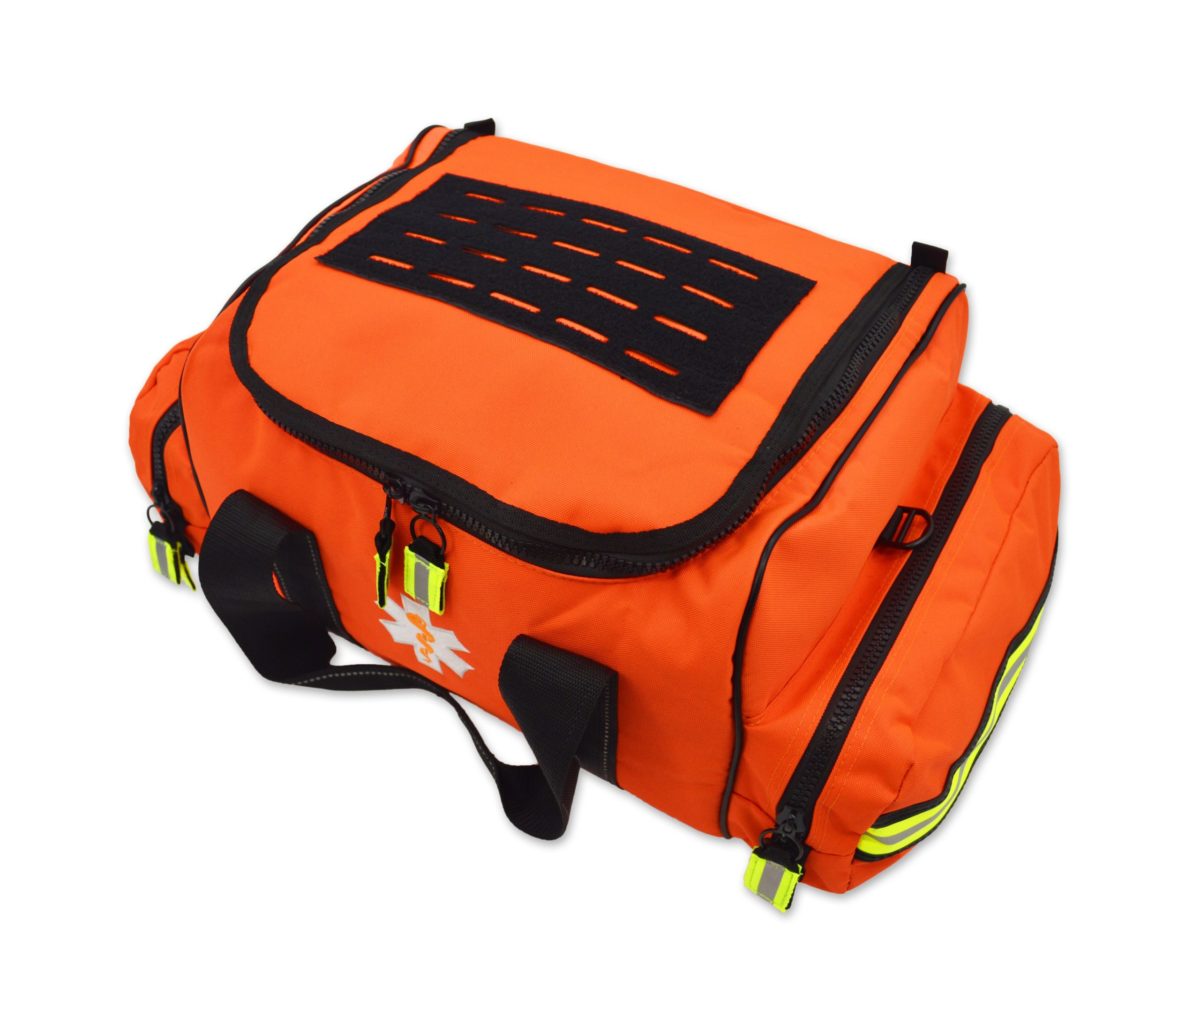 Lightning X Large First Responder Bag (LXMB30) | The Fire Center | The Fire Store | Store | FREE SHIPPING | LARGE EMT FIRST RESPONDER BAG W/ CUSTOMIZABLE DIVIDERS One of our best selling medical bags, the Lightning X Large First Responder Bag is designed similarly to the LXMB20 with more space in mind.